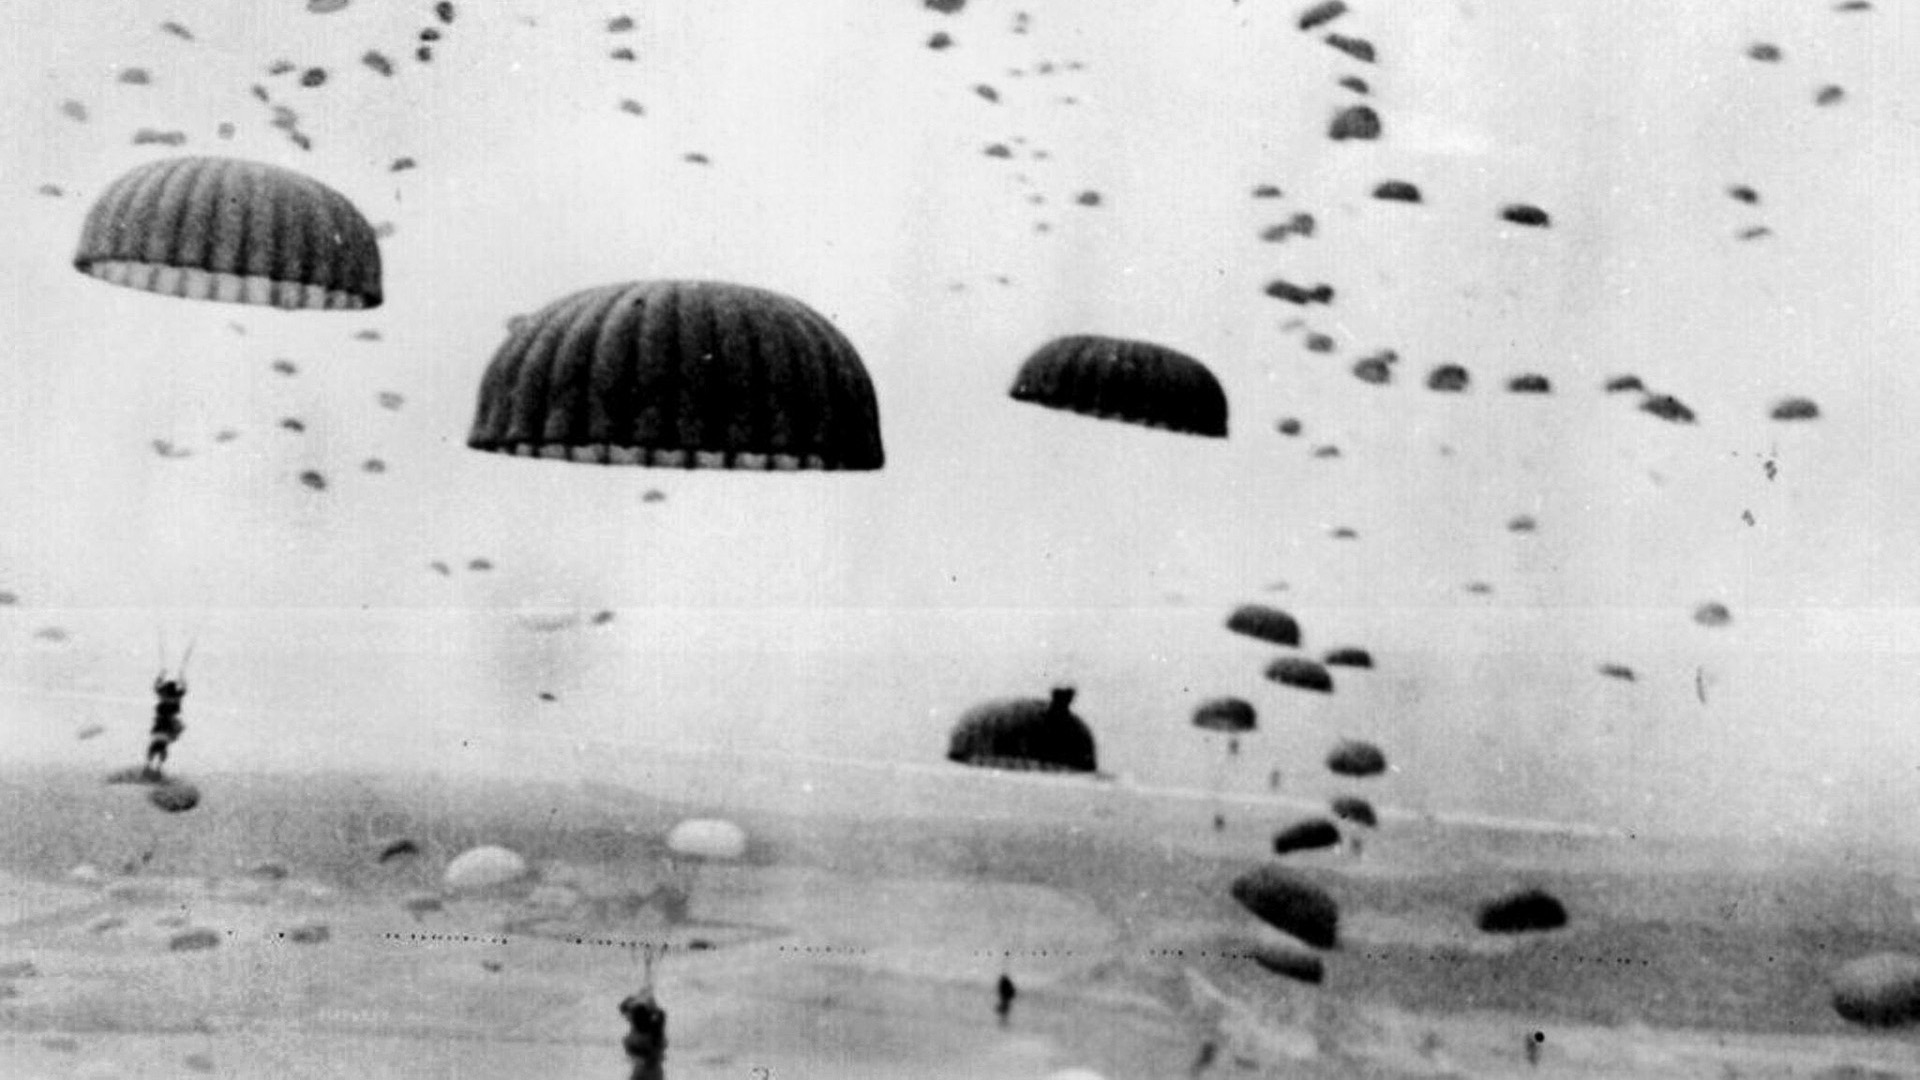 Real paratroopers or fake? The Allies were inspired to use dummy parachutists from the Germans, who deployed decoys during their 1940 attack on the Belgian fortress of Eben-Emael. (Shown here are real Americans during Operation Market Garden.)